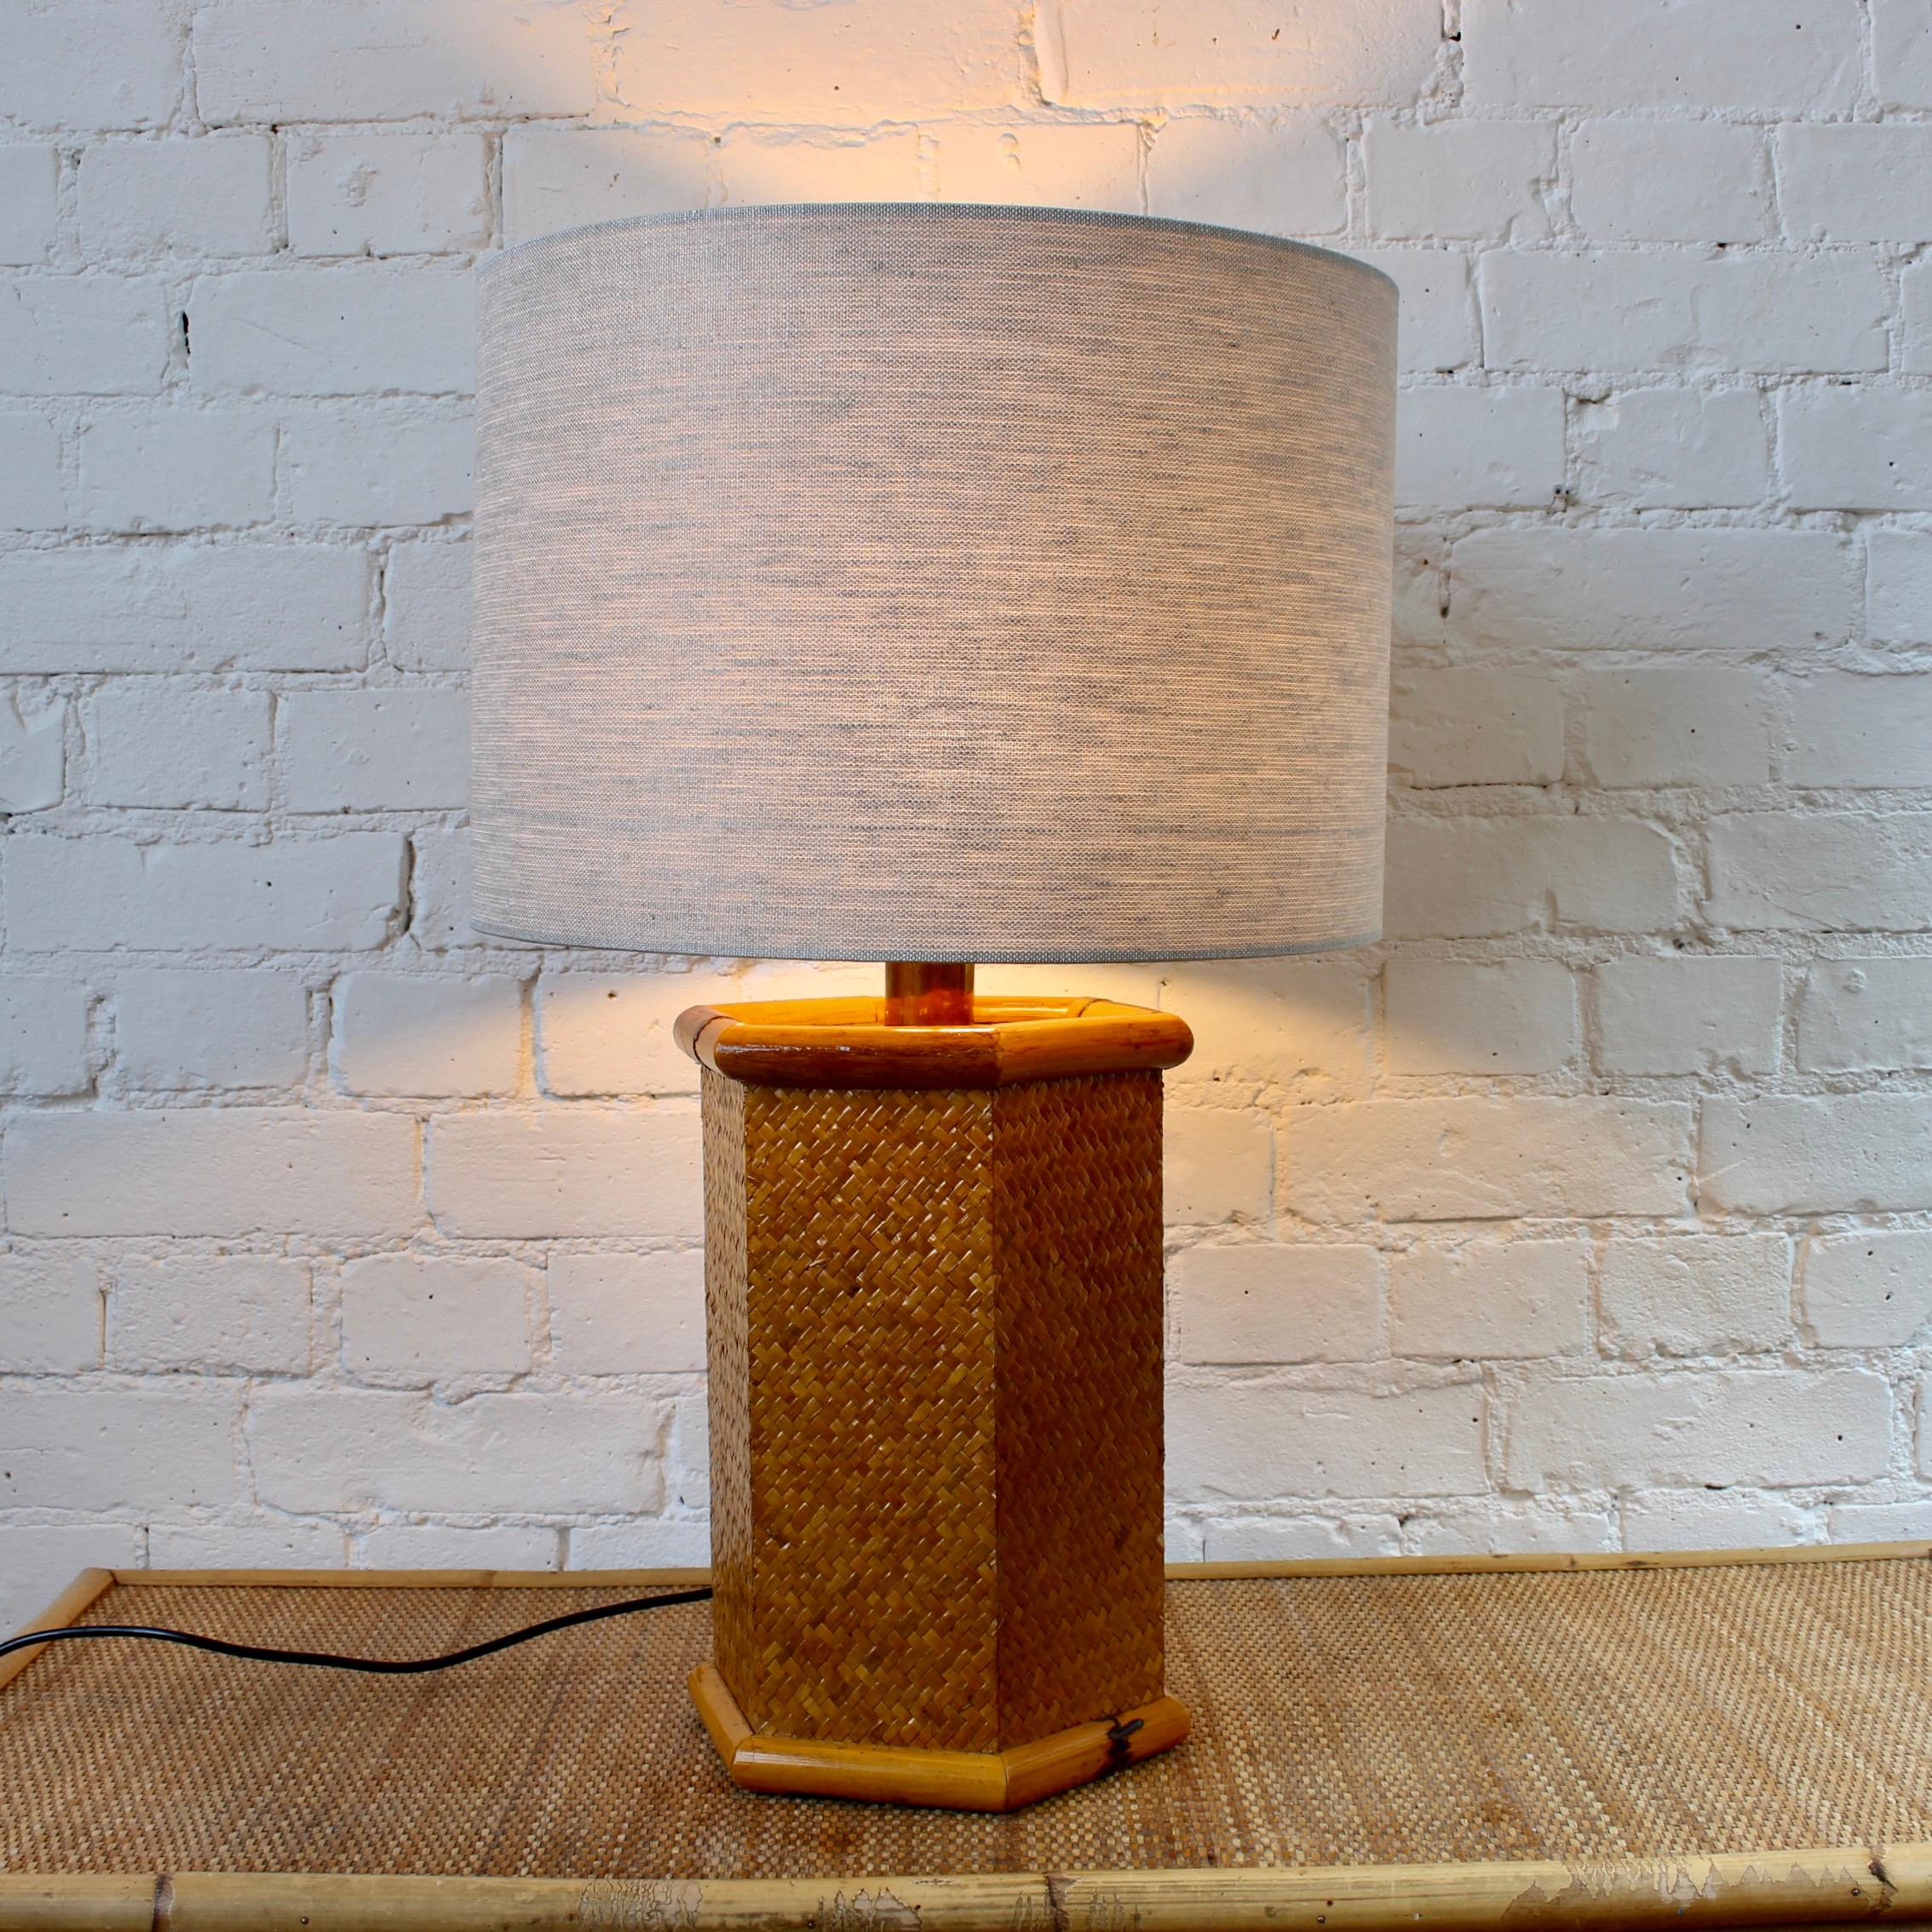 Vintage Italian rattan and bamboo table lamp (circa 1970s). Hexagonal shaped table lamp with woven rattan in the middle of two bamboo canes at the top and bottom providing structural support to the piece. The lamp transports one immediately to the